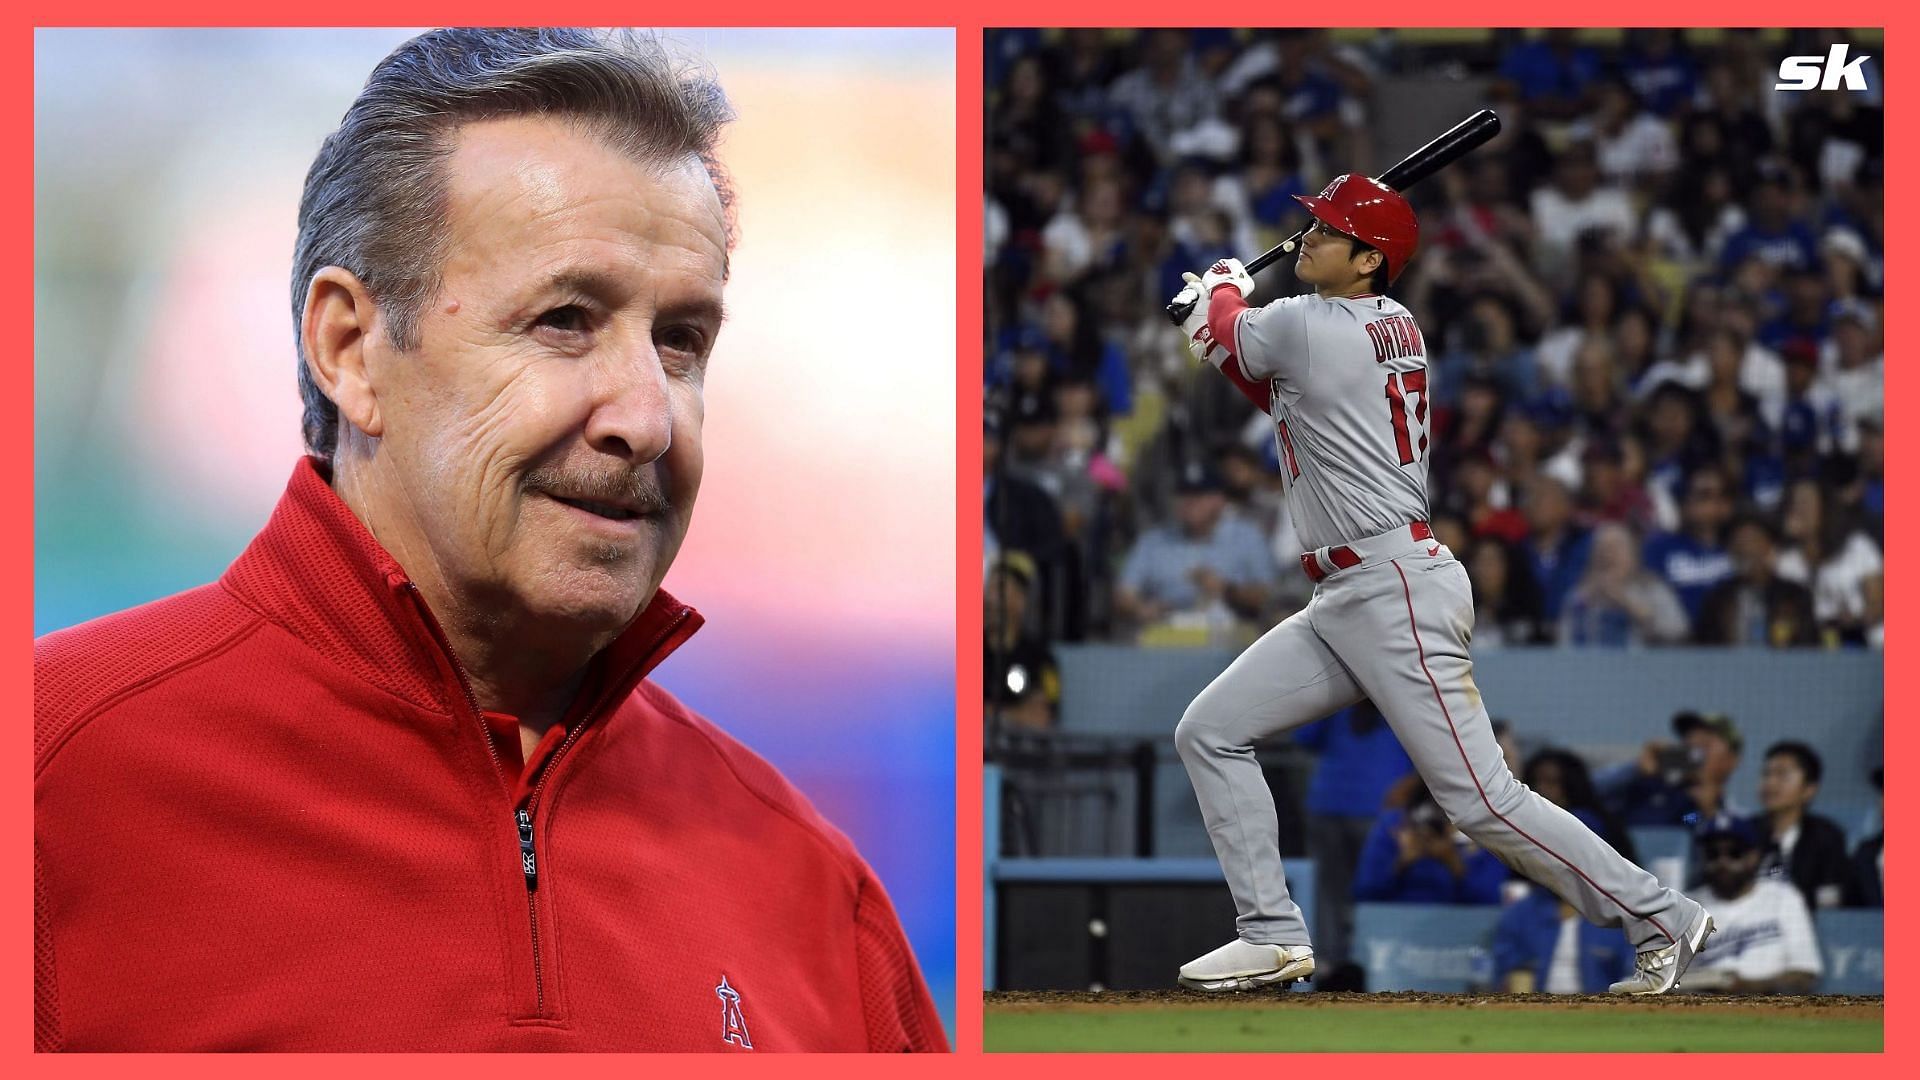 Arturo Moreno owner of the Los Angeles Angels will not be ready to approve Shohei Ohtani